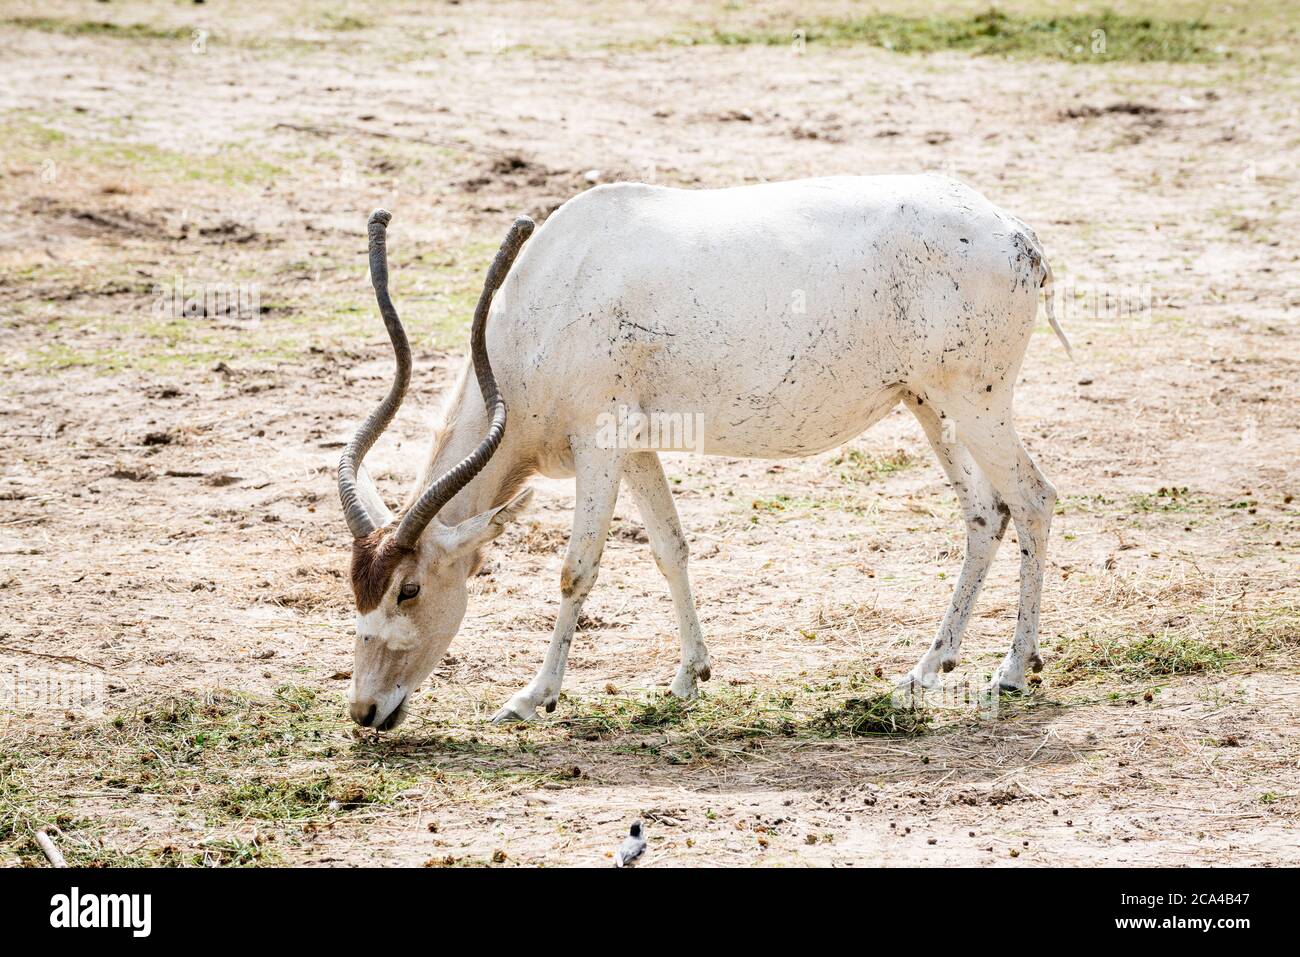 The addax (Addax nasomaculatus) is an antelope of the genus Addax, that lives in the Sahara desert. Stock Photo